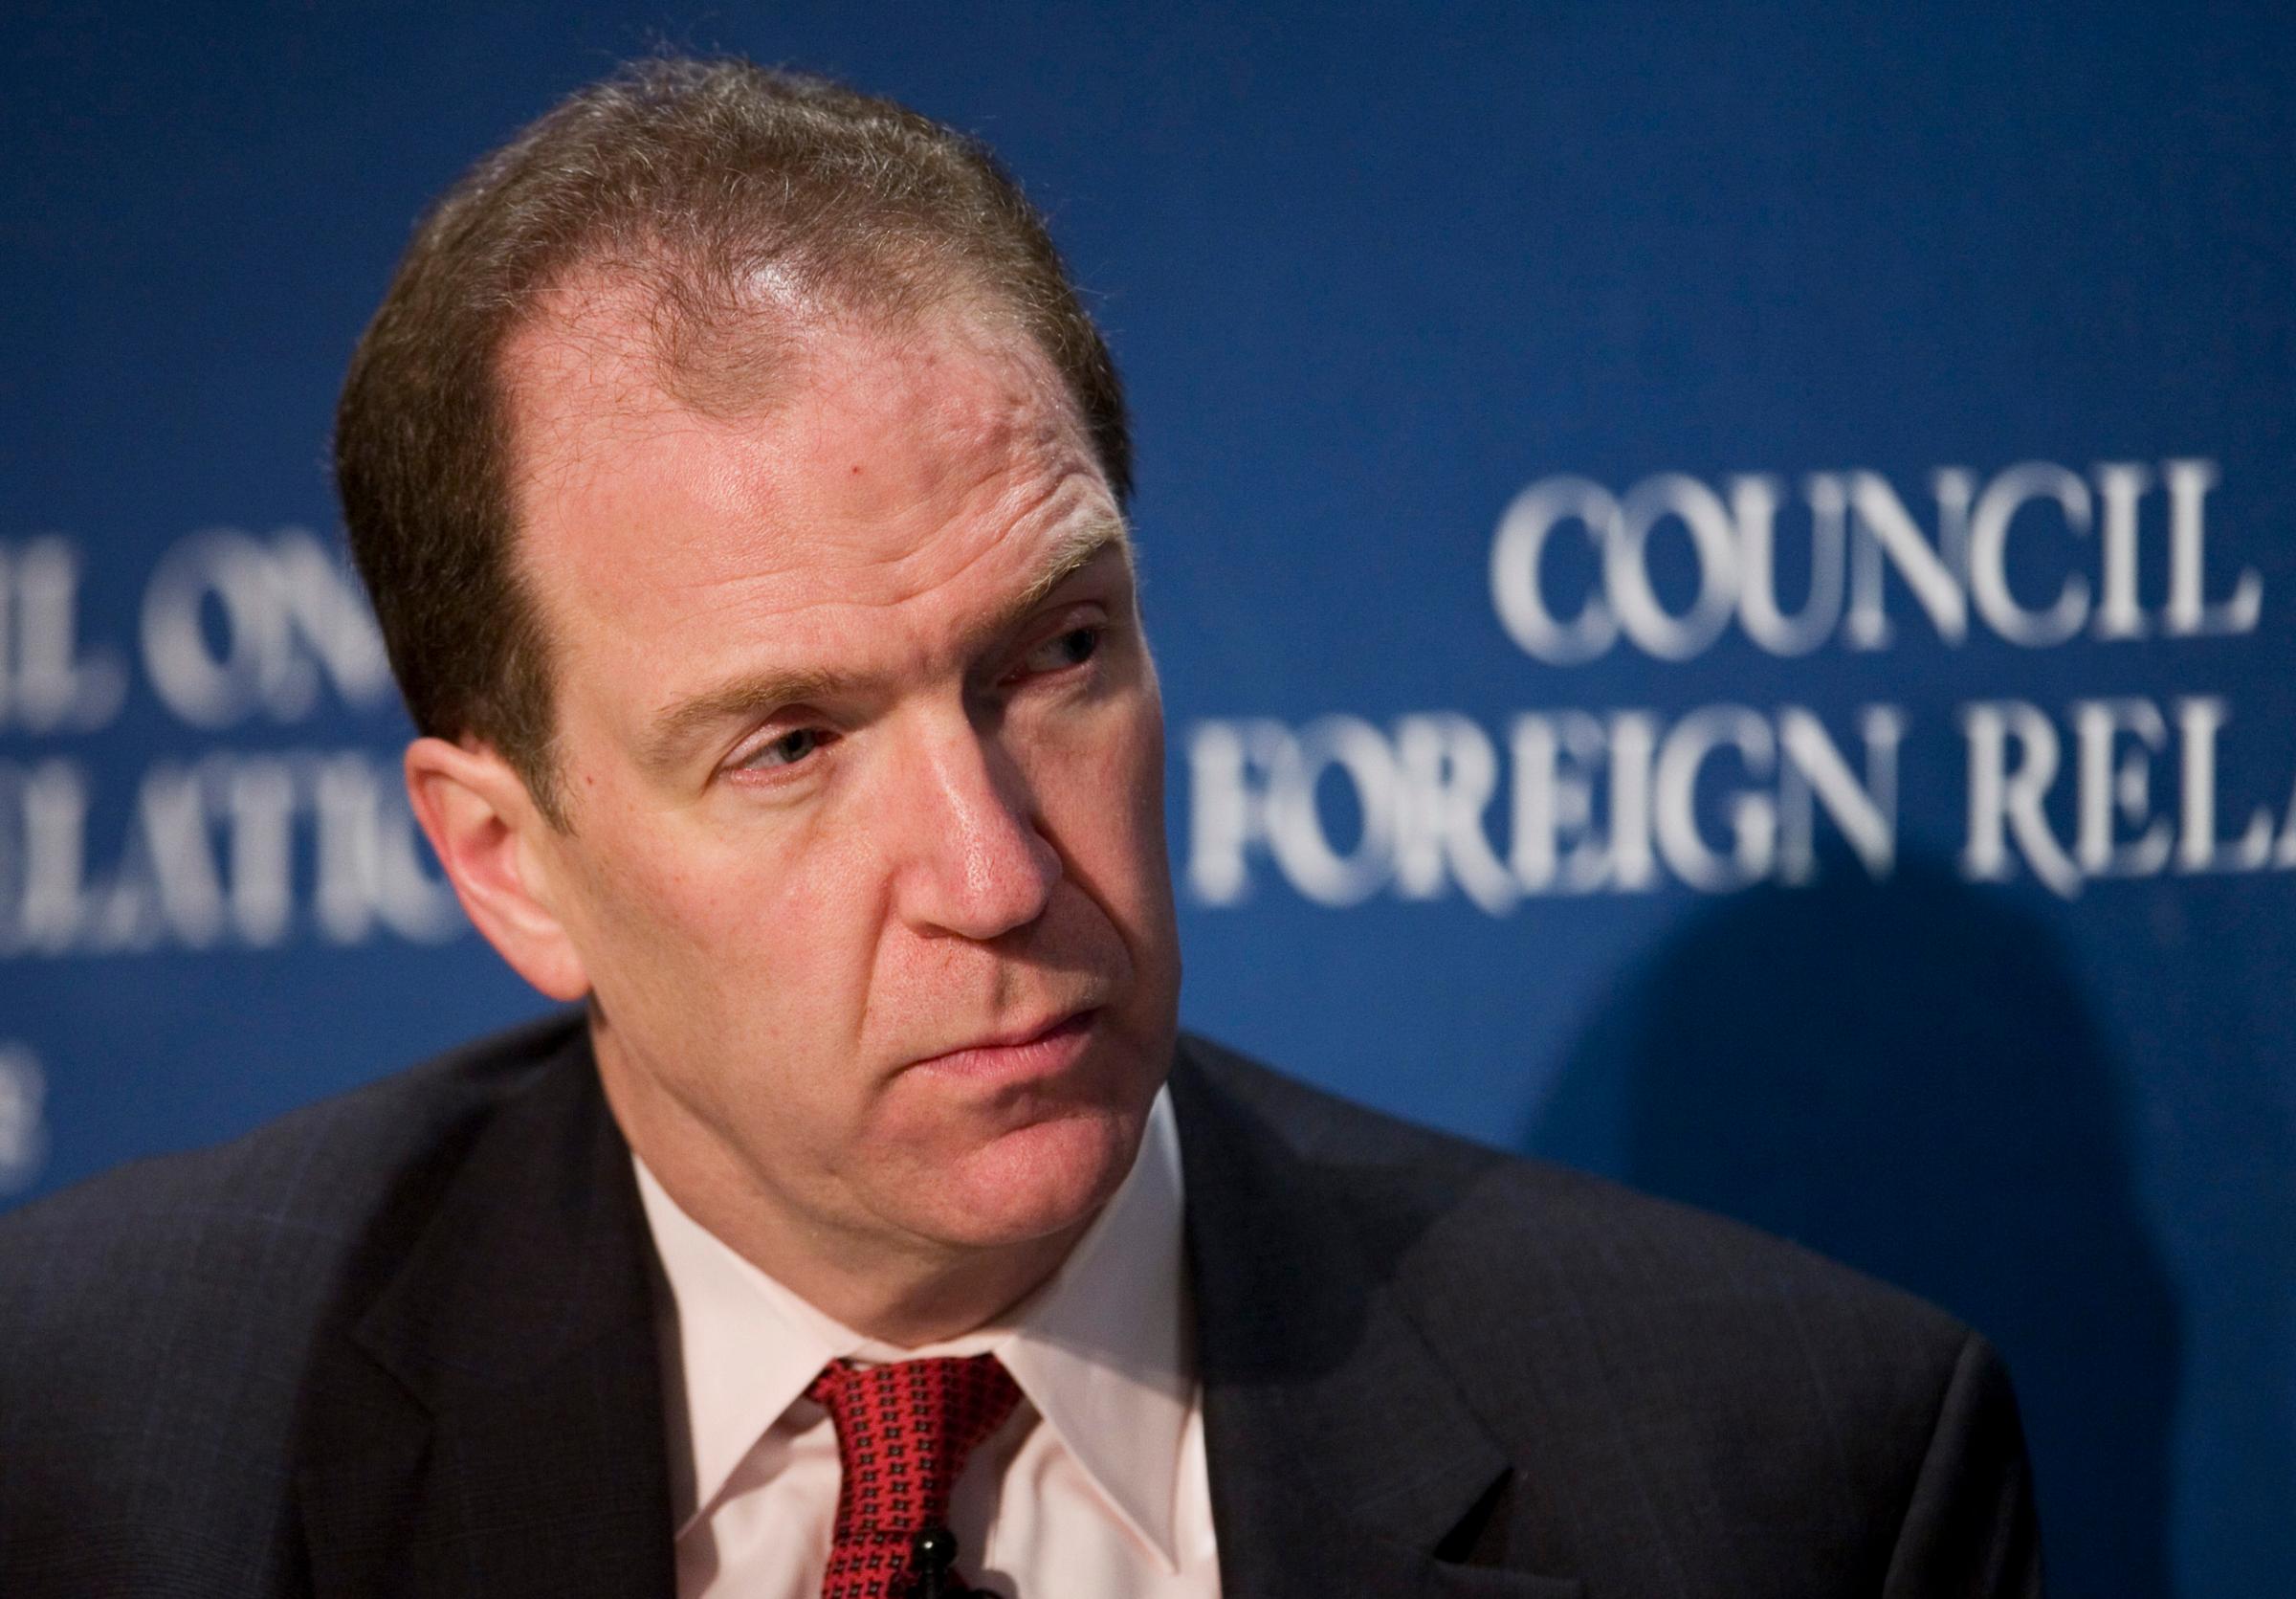 David Malpass, the Chief Economist at Bear, Stearns and Co. Inc., speaks at the Council on Foreign Relations in New York City on Nov. 19, 2007.